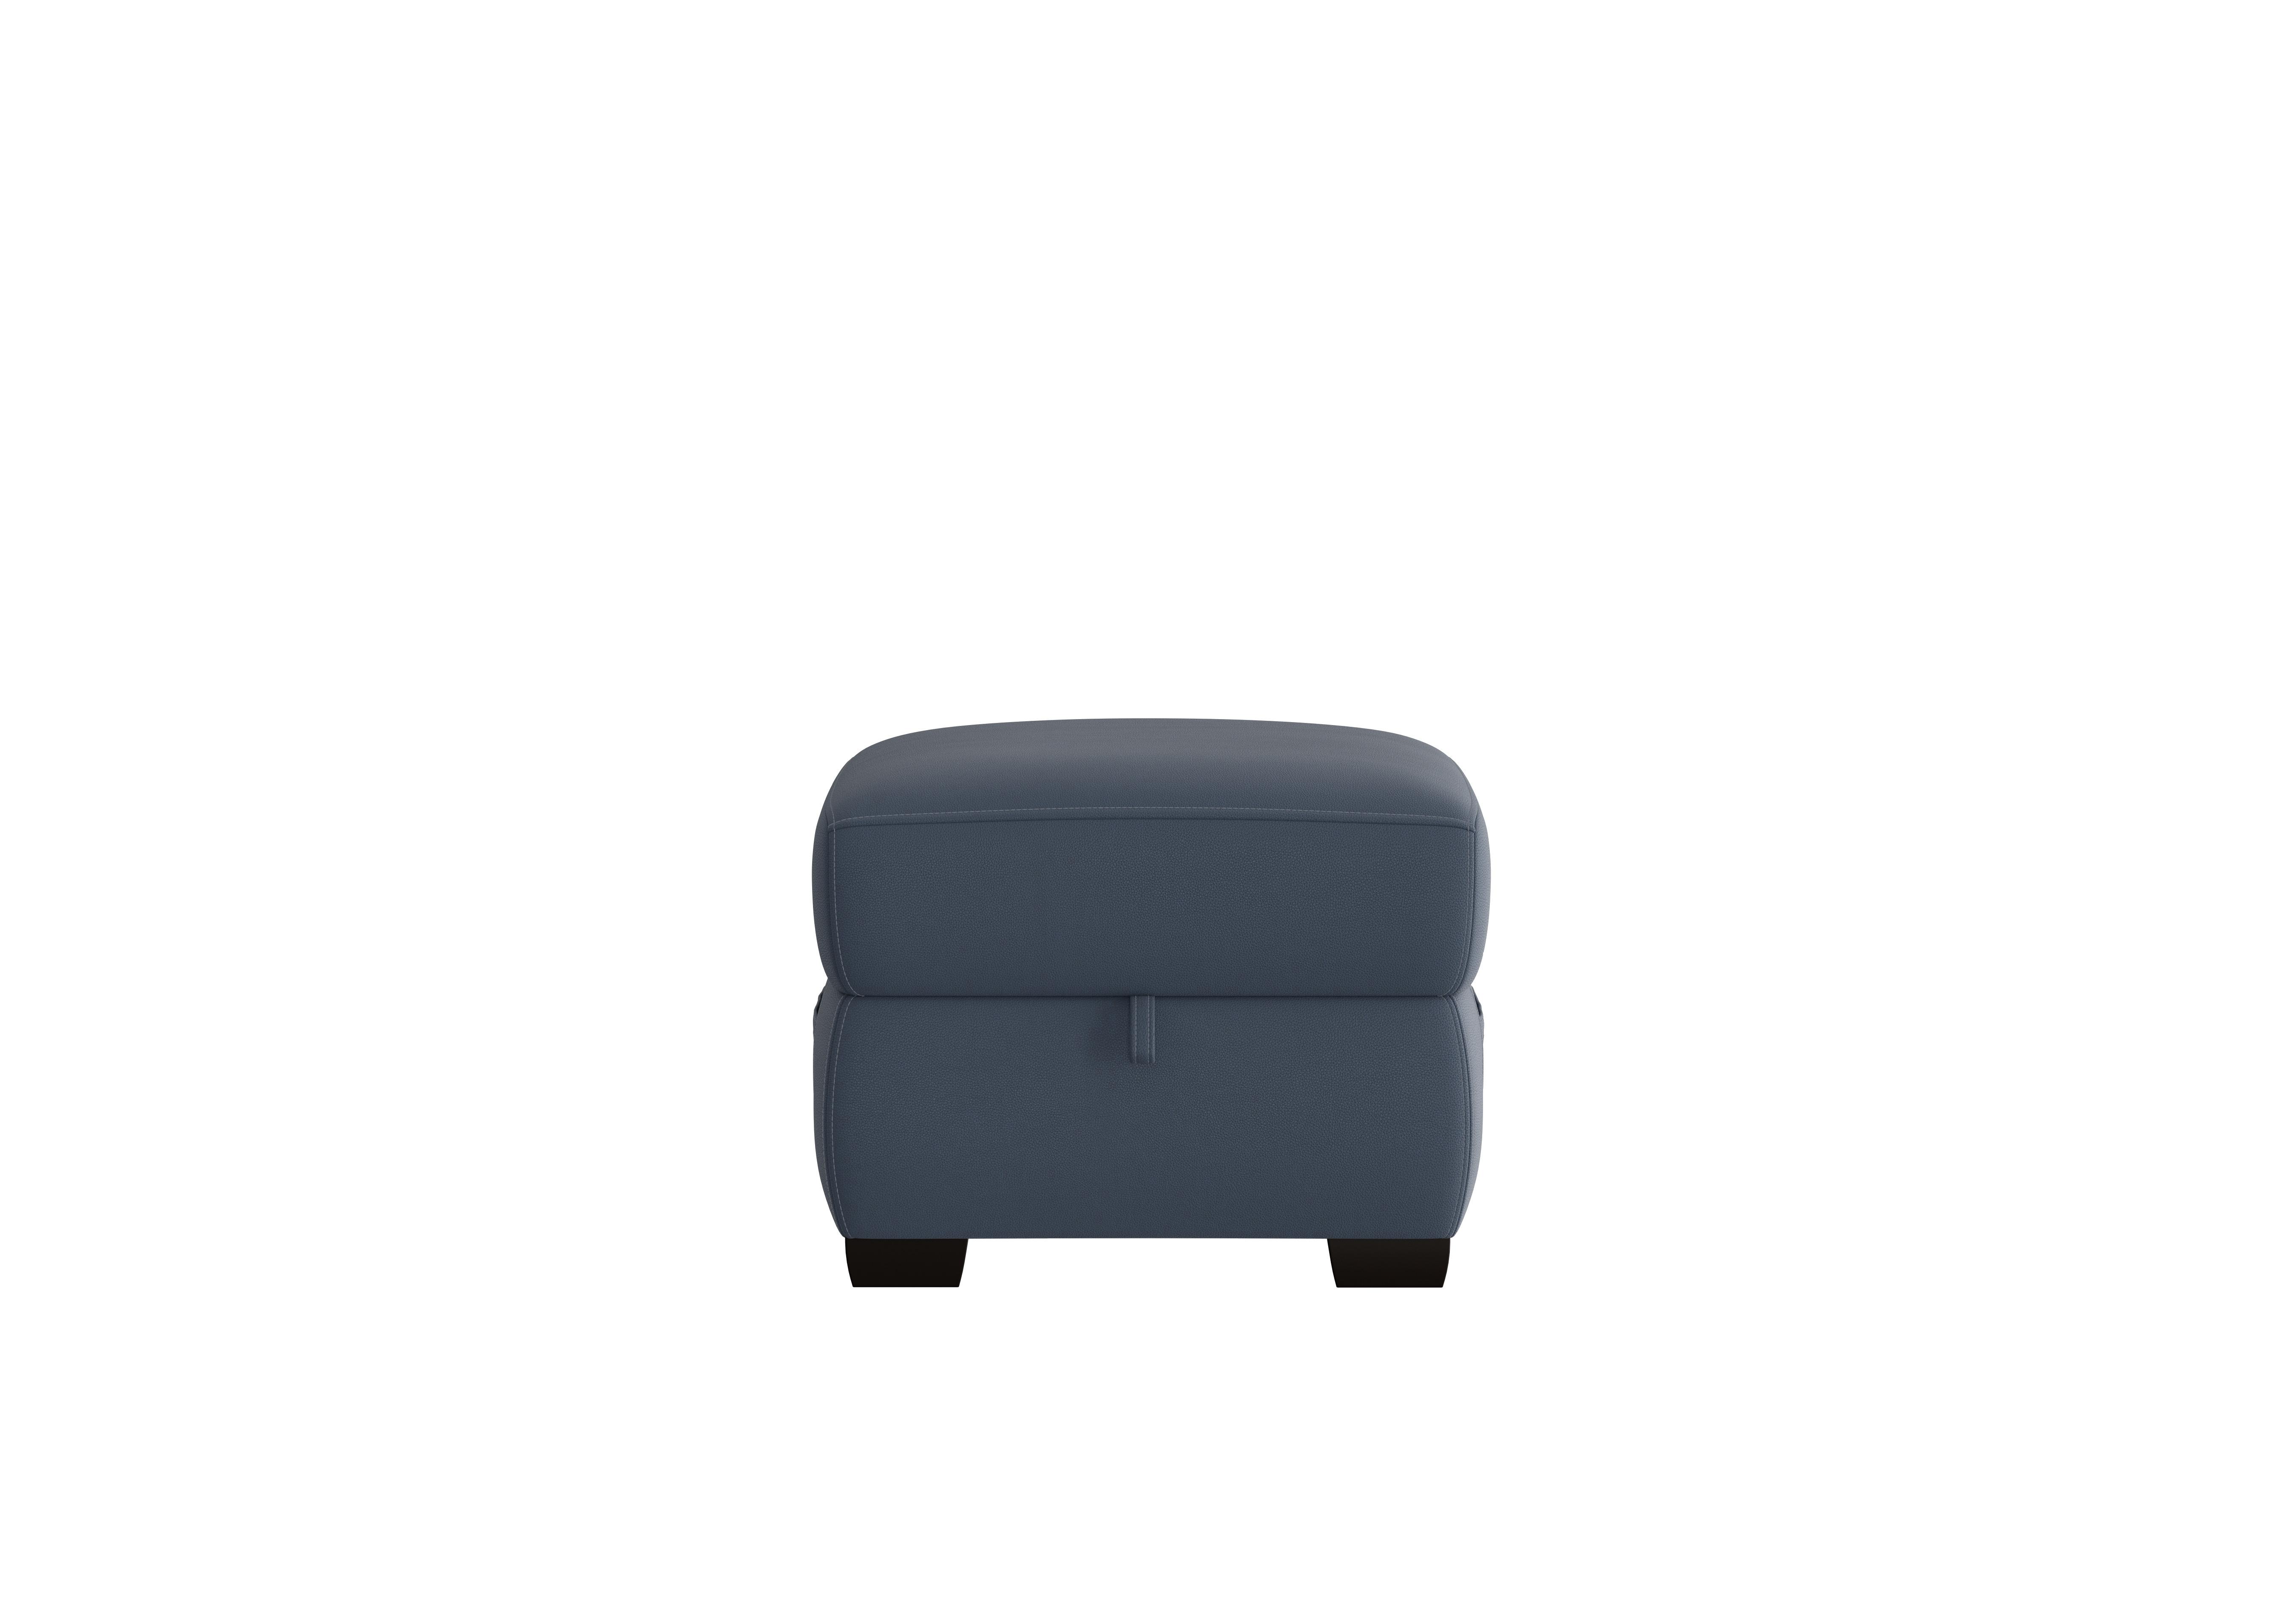 Starlight Express Leather Storage Footstool in Bv-313e Ocean Blue on Furniture Village